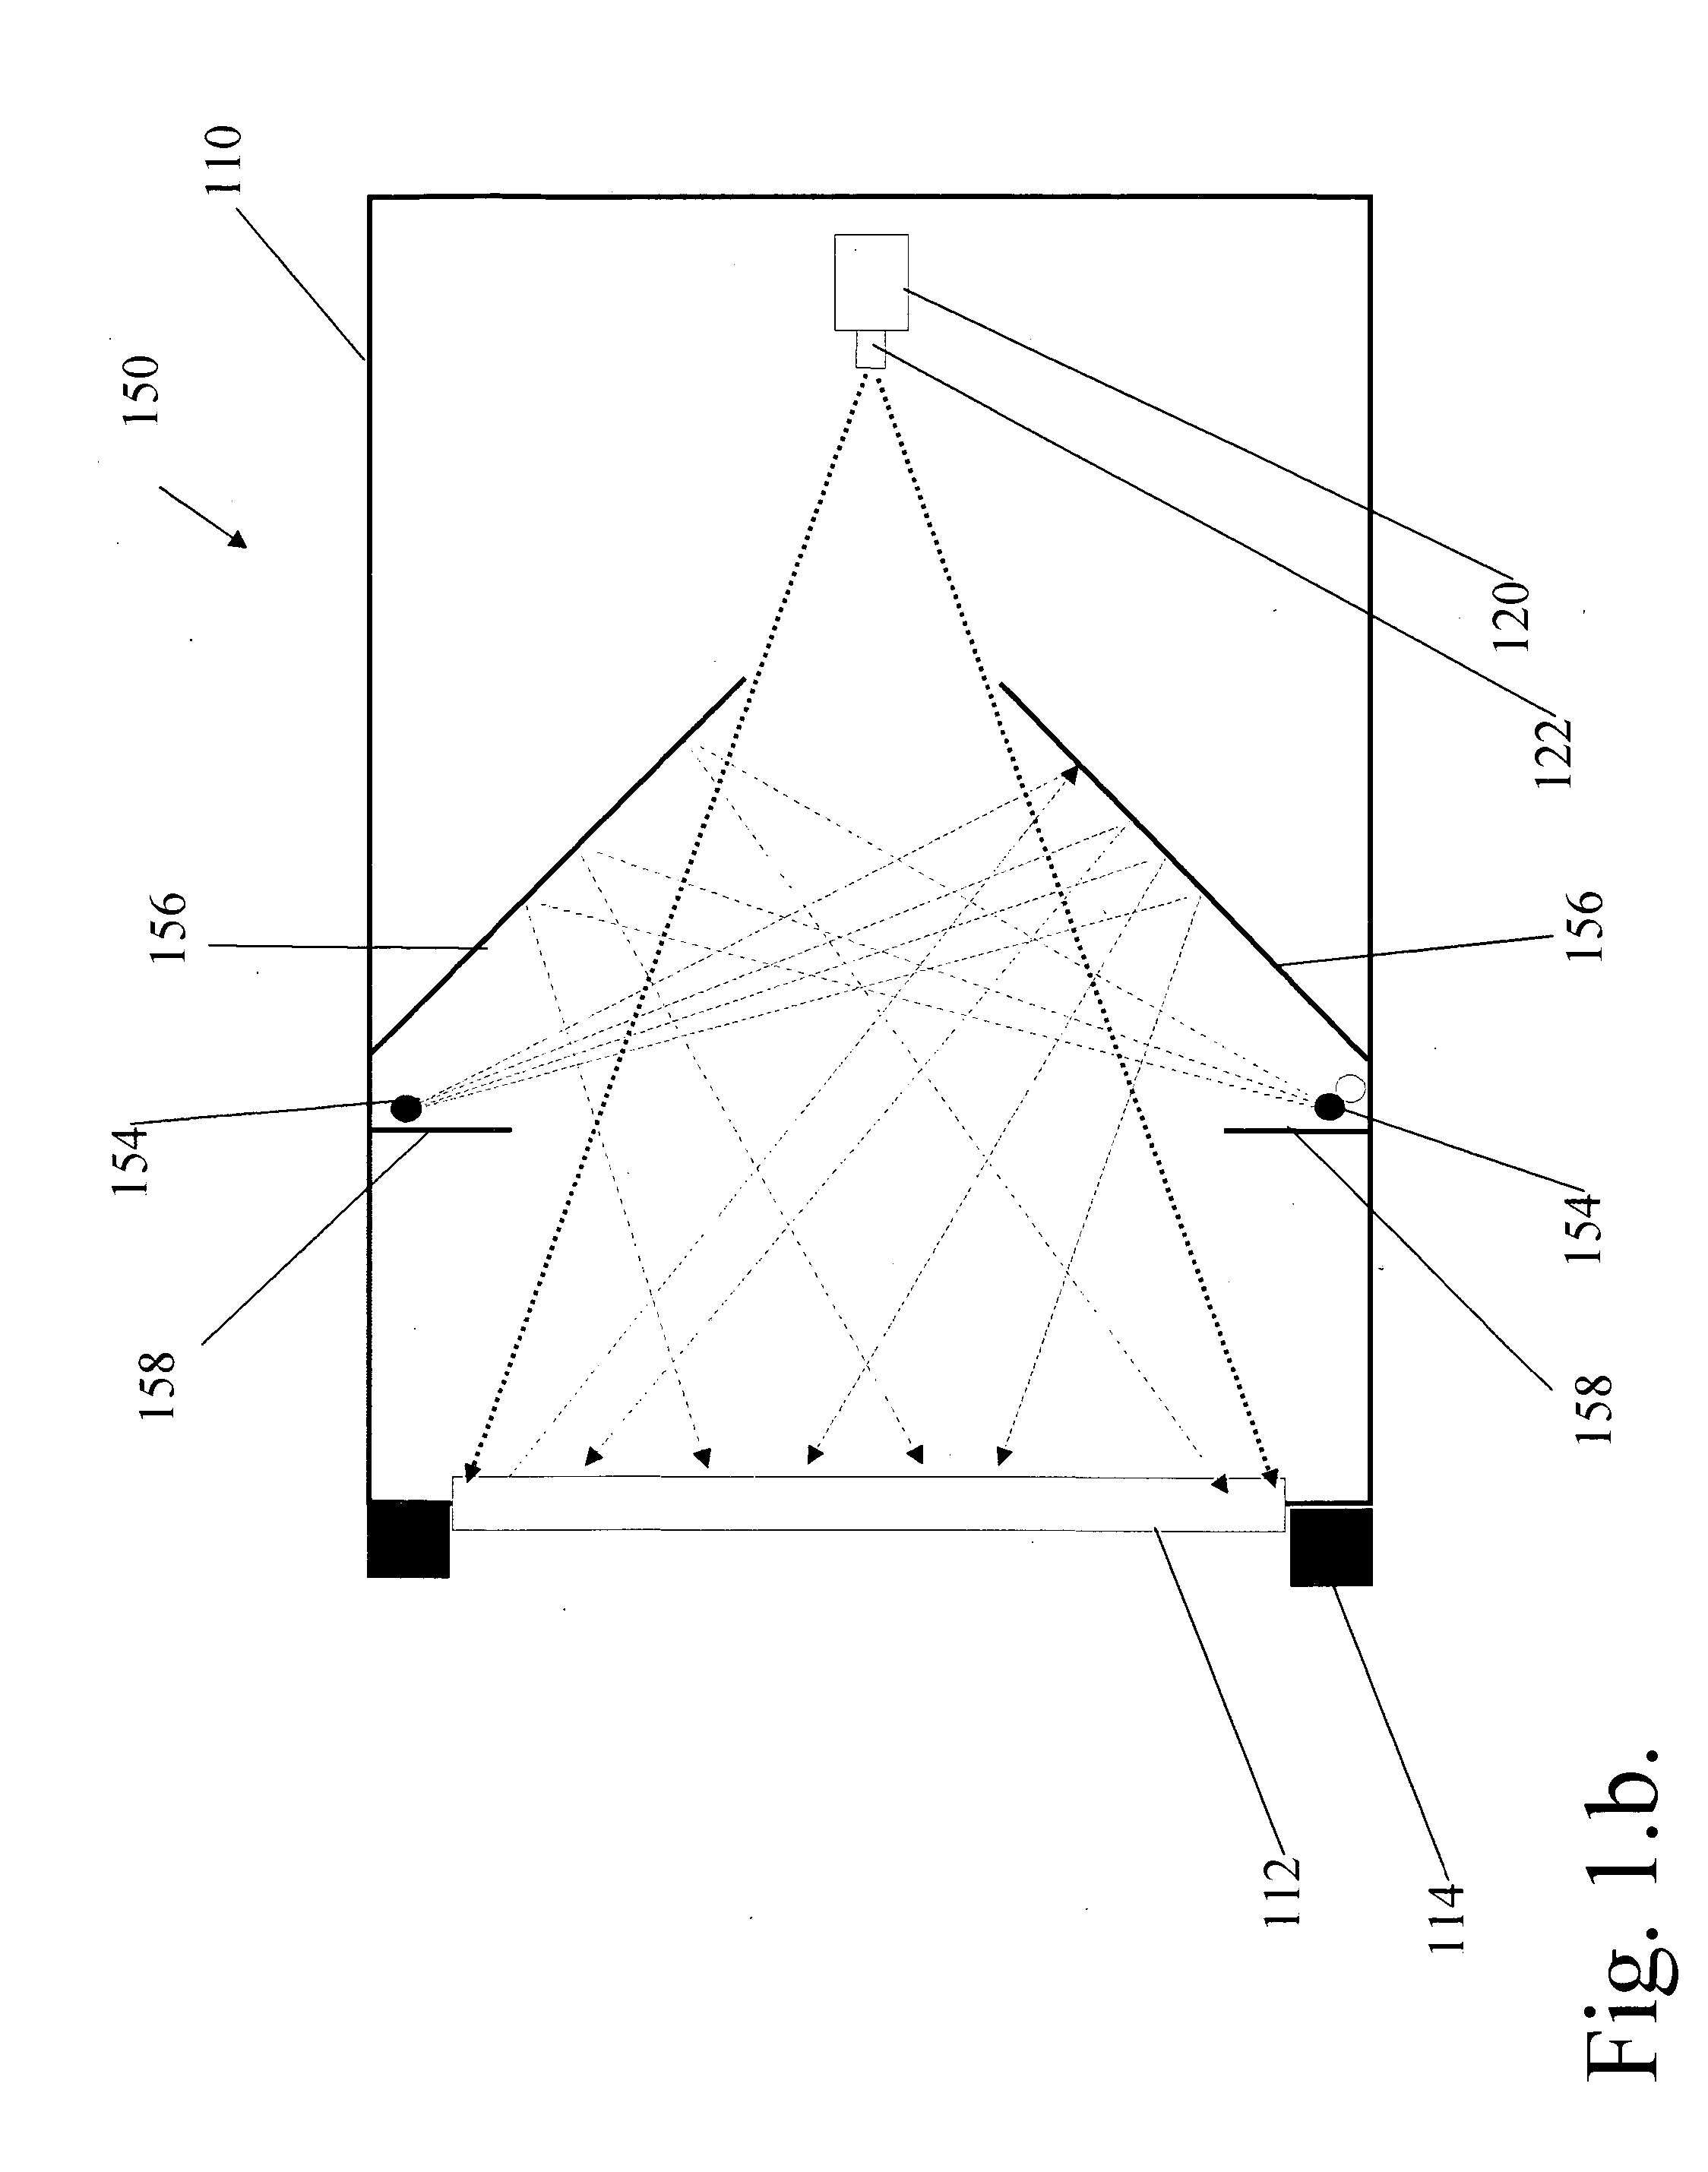 System for extracting information from an identity card